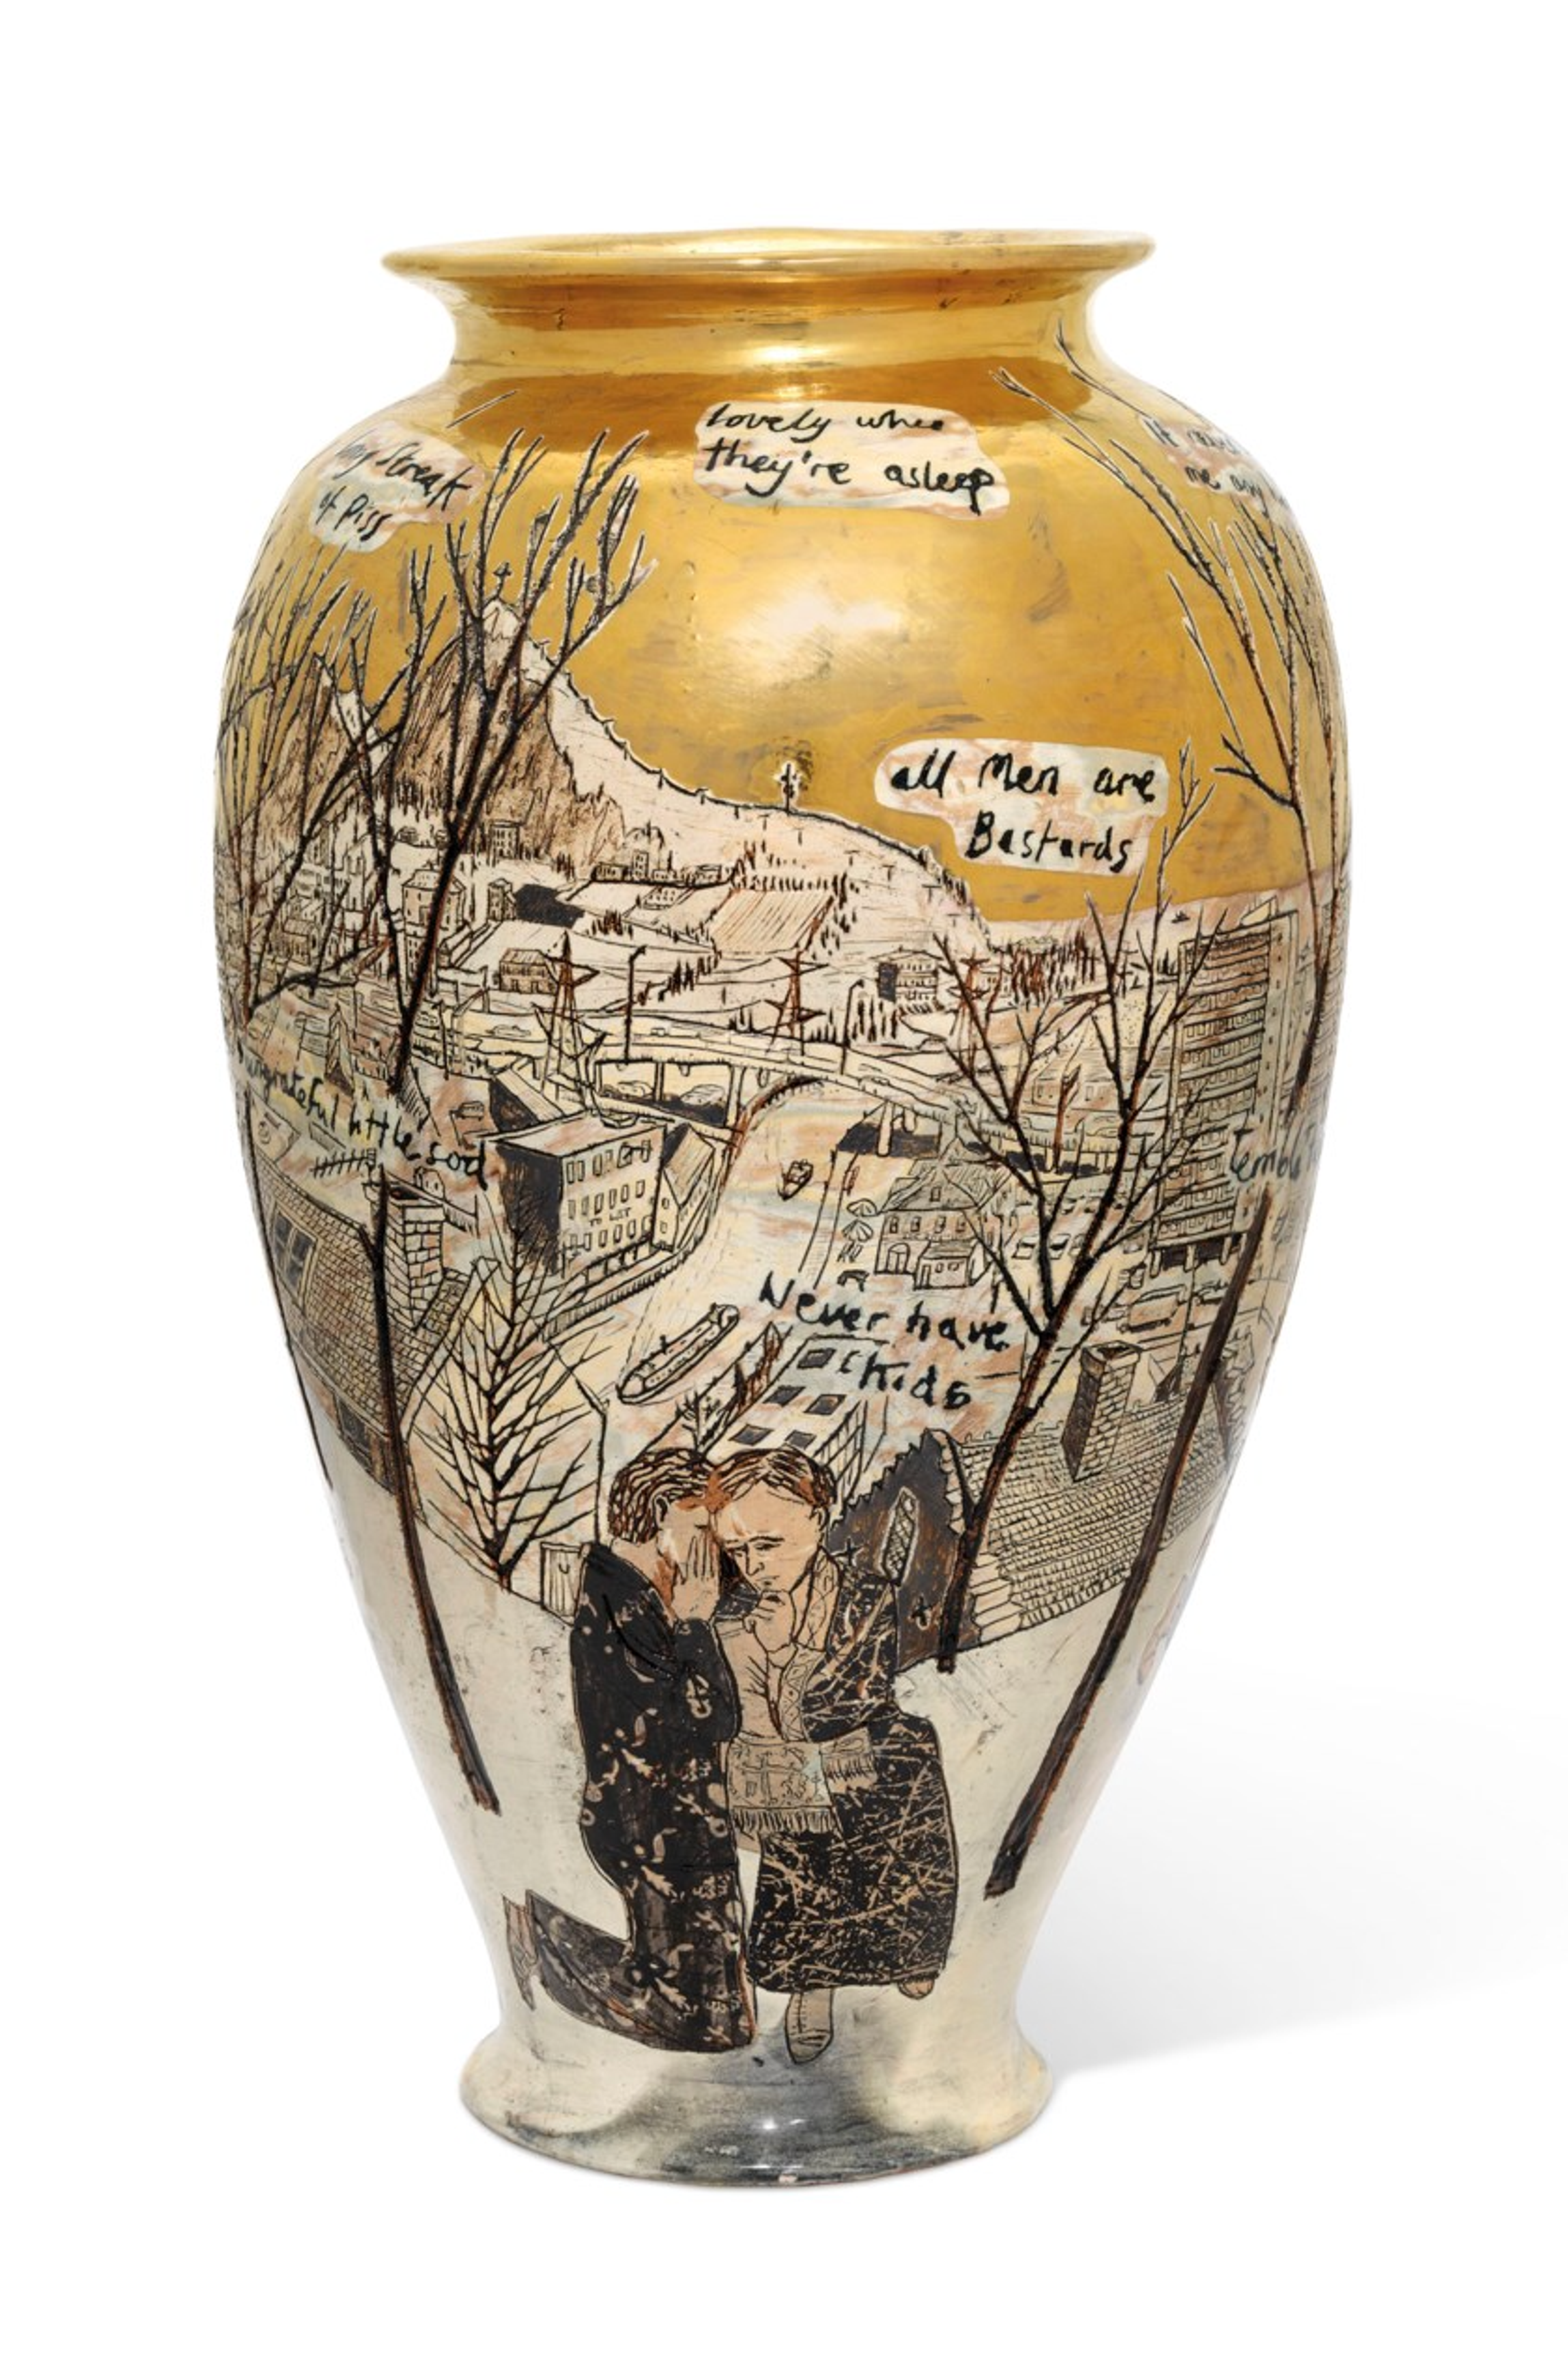 Glazed earthenware vase by Grayson Perry in gold, silver, black and cream, depicting a sorrowful couple, following the loss of their child. The urn is peppered with phrases which dismiss the welfare of children, such as 'never have kids'.